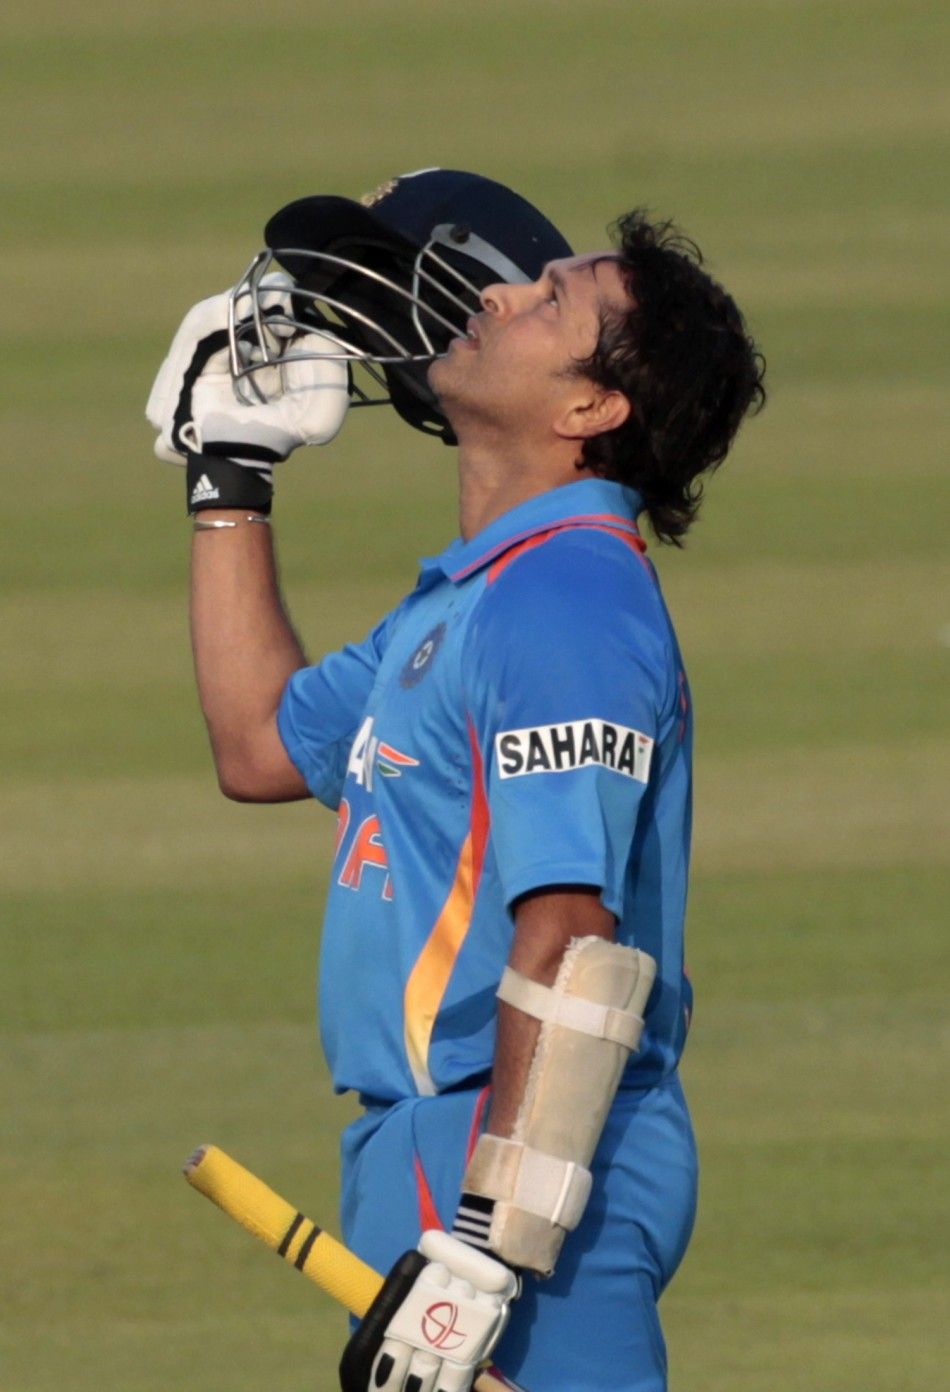 Indias Sachin Tendulkar celebrates after he scored his 100th international century during their Asia Cup one- day international ODI cricket match against Bangladesh in Dhaka March 16, 2012. 